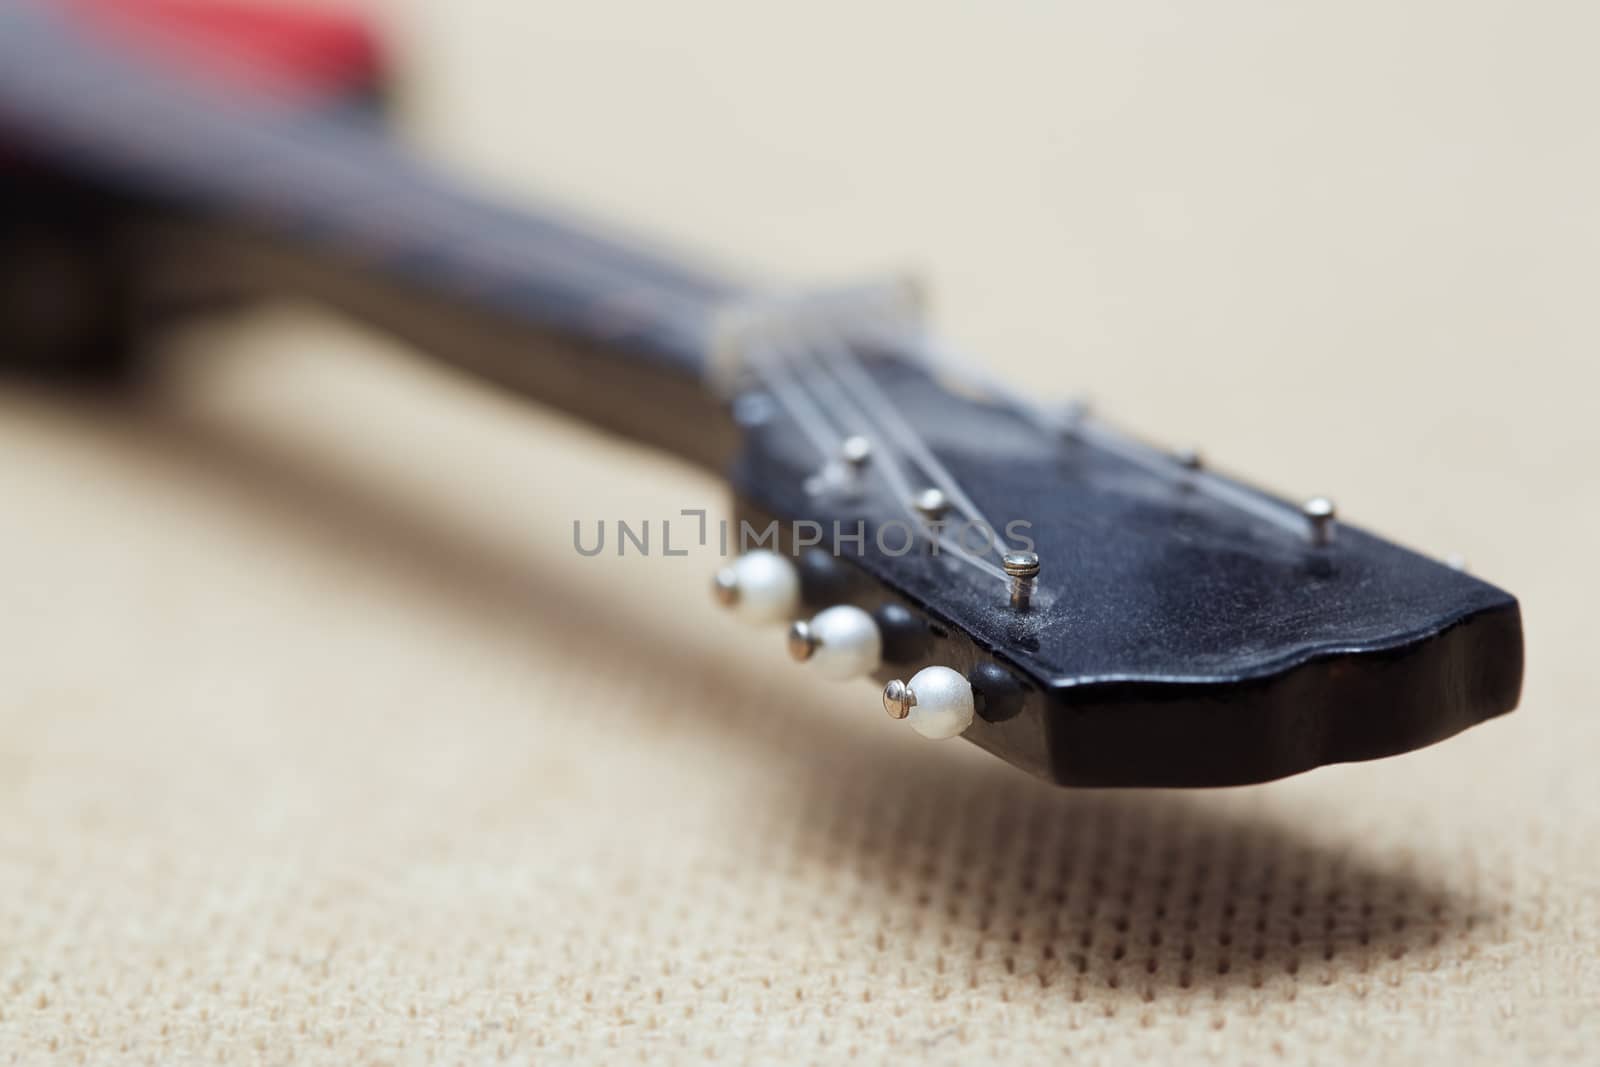 Acoustic guitare. Close-up view with shallow depth of field